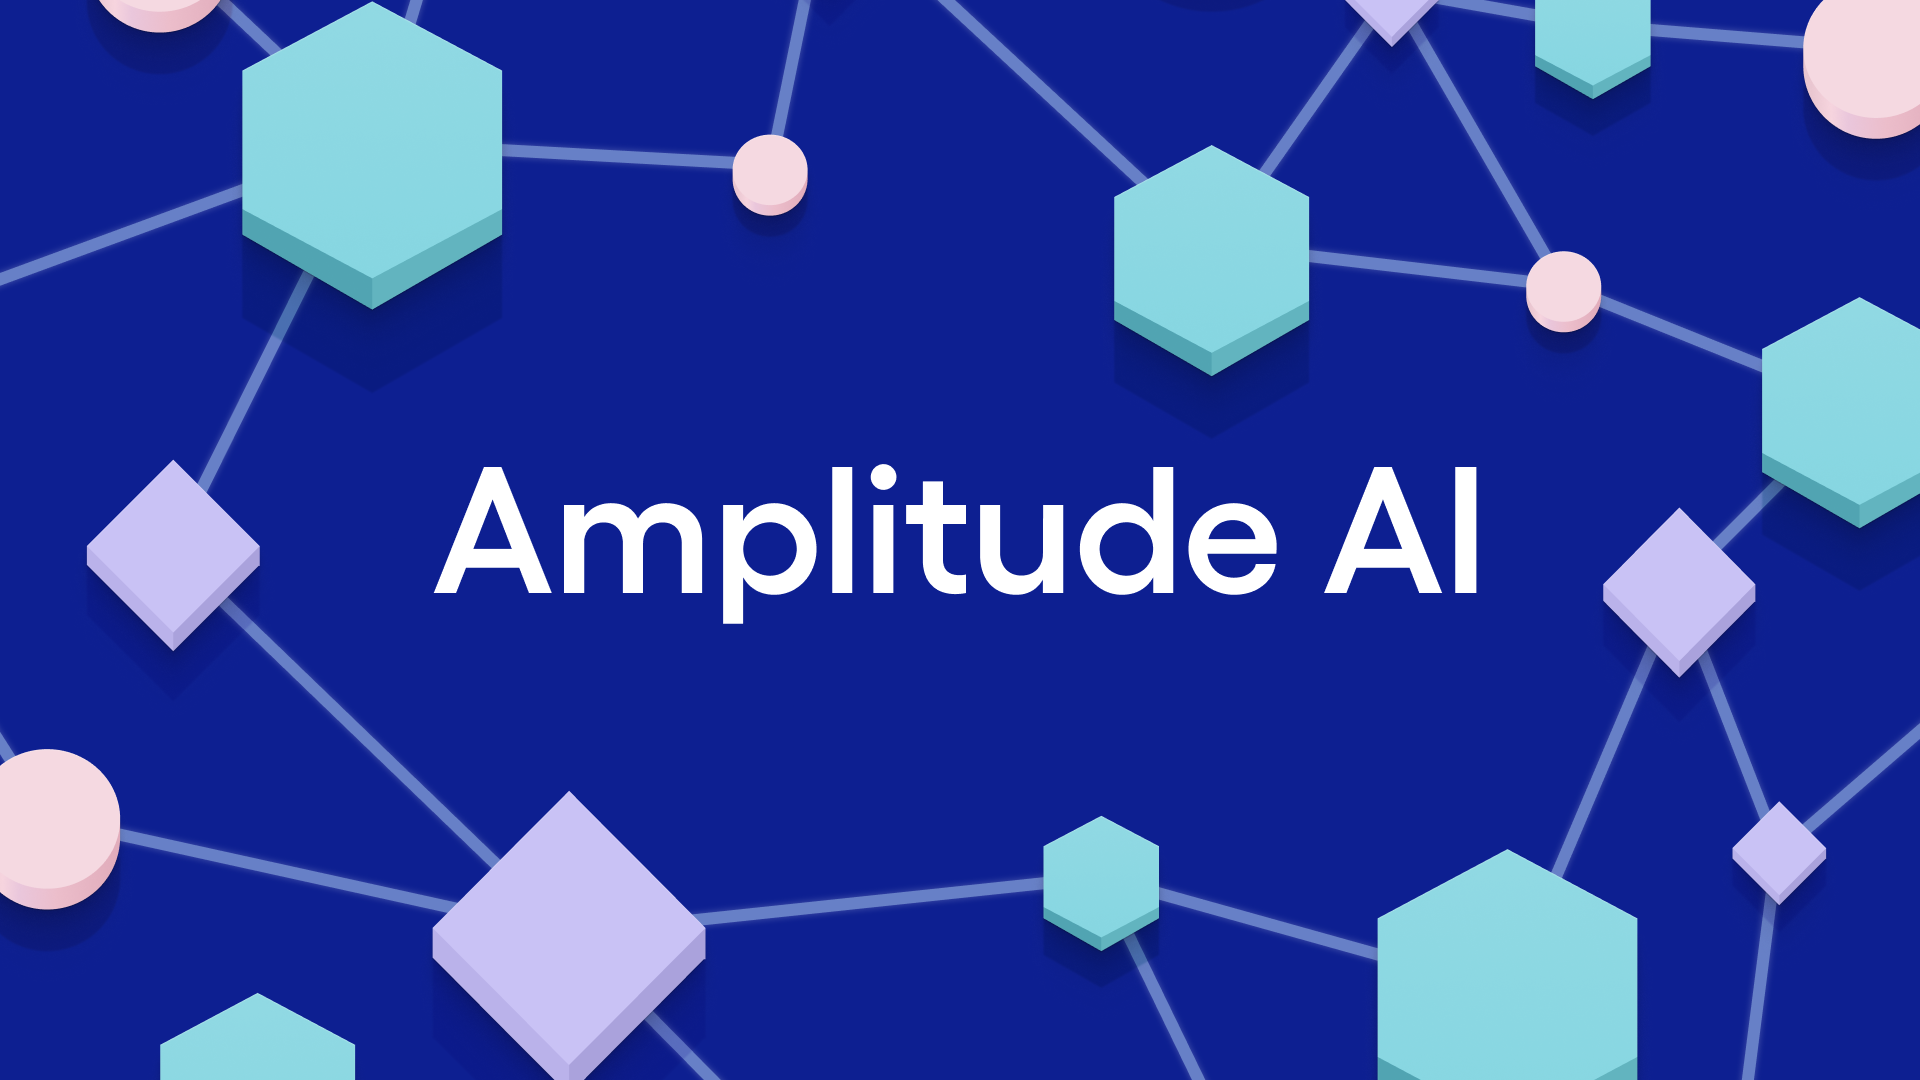 A geometric 3D shapes in Amplitude colors on a blue-background with white text indicating Amplitude AI